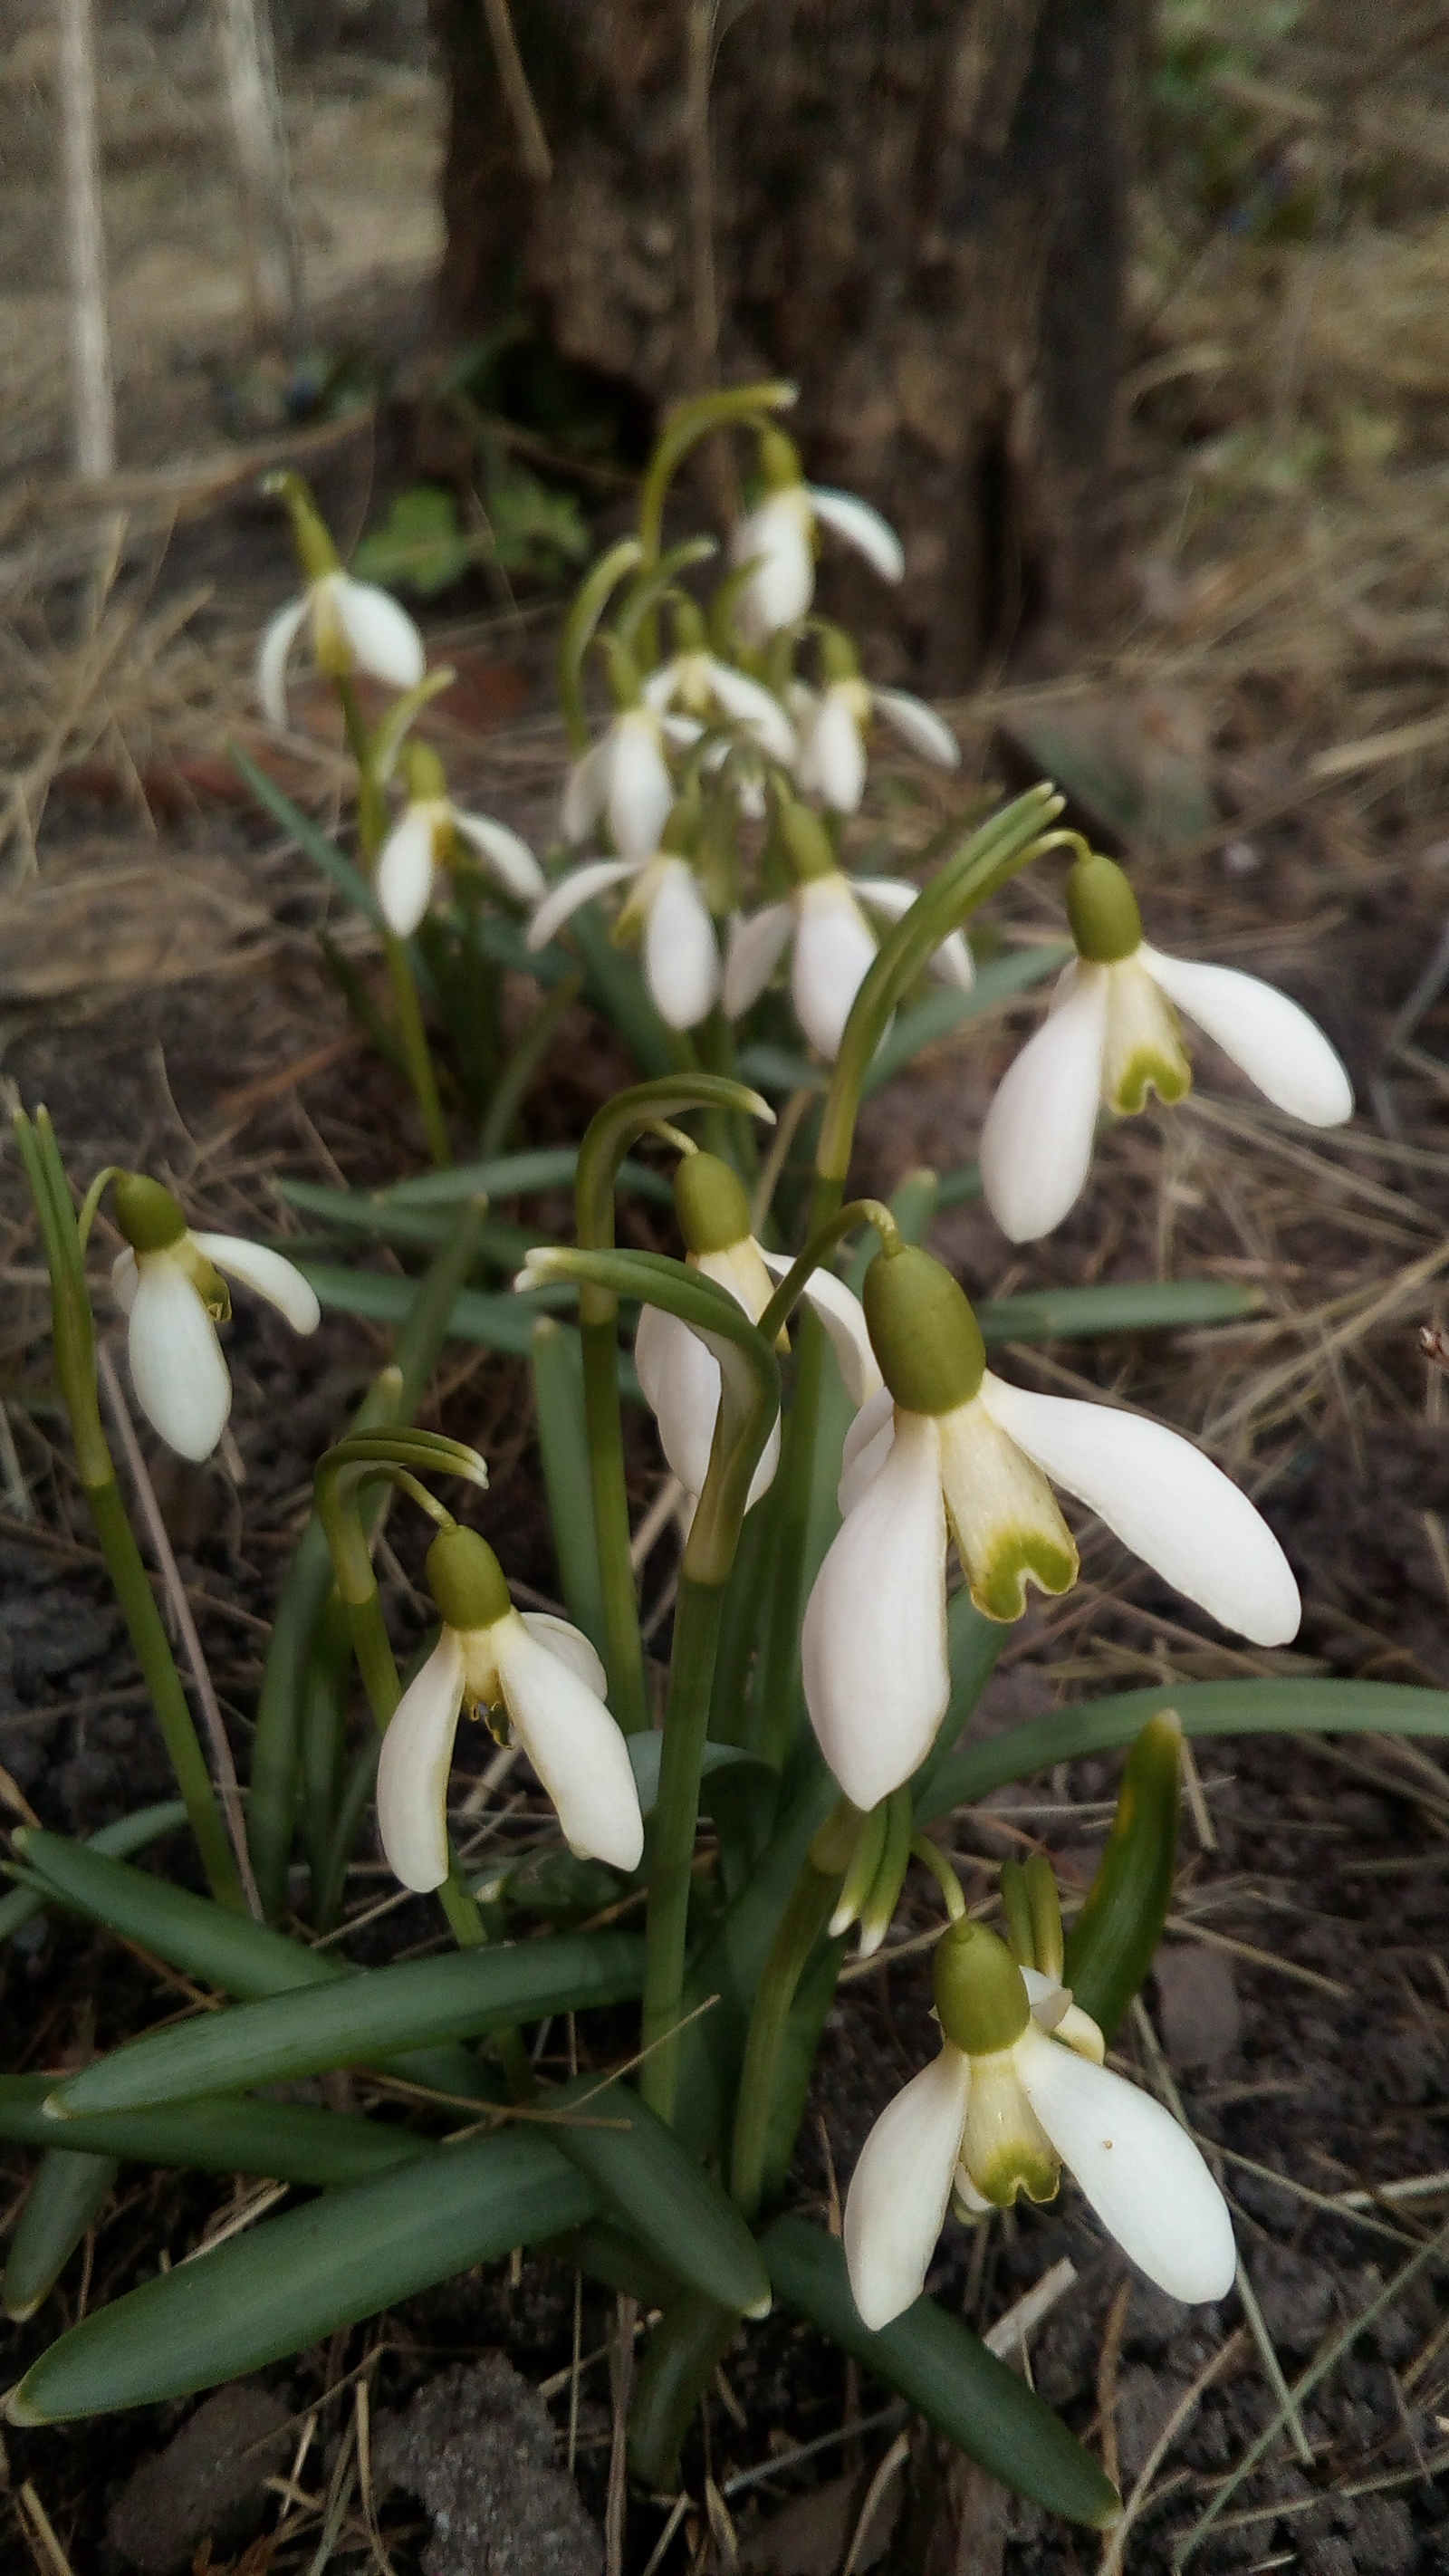 Snowdrops - My, Snowdrops, The photo, Spring, Snowdrops flowers